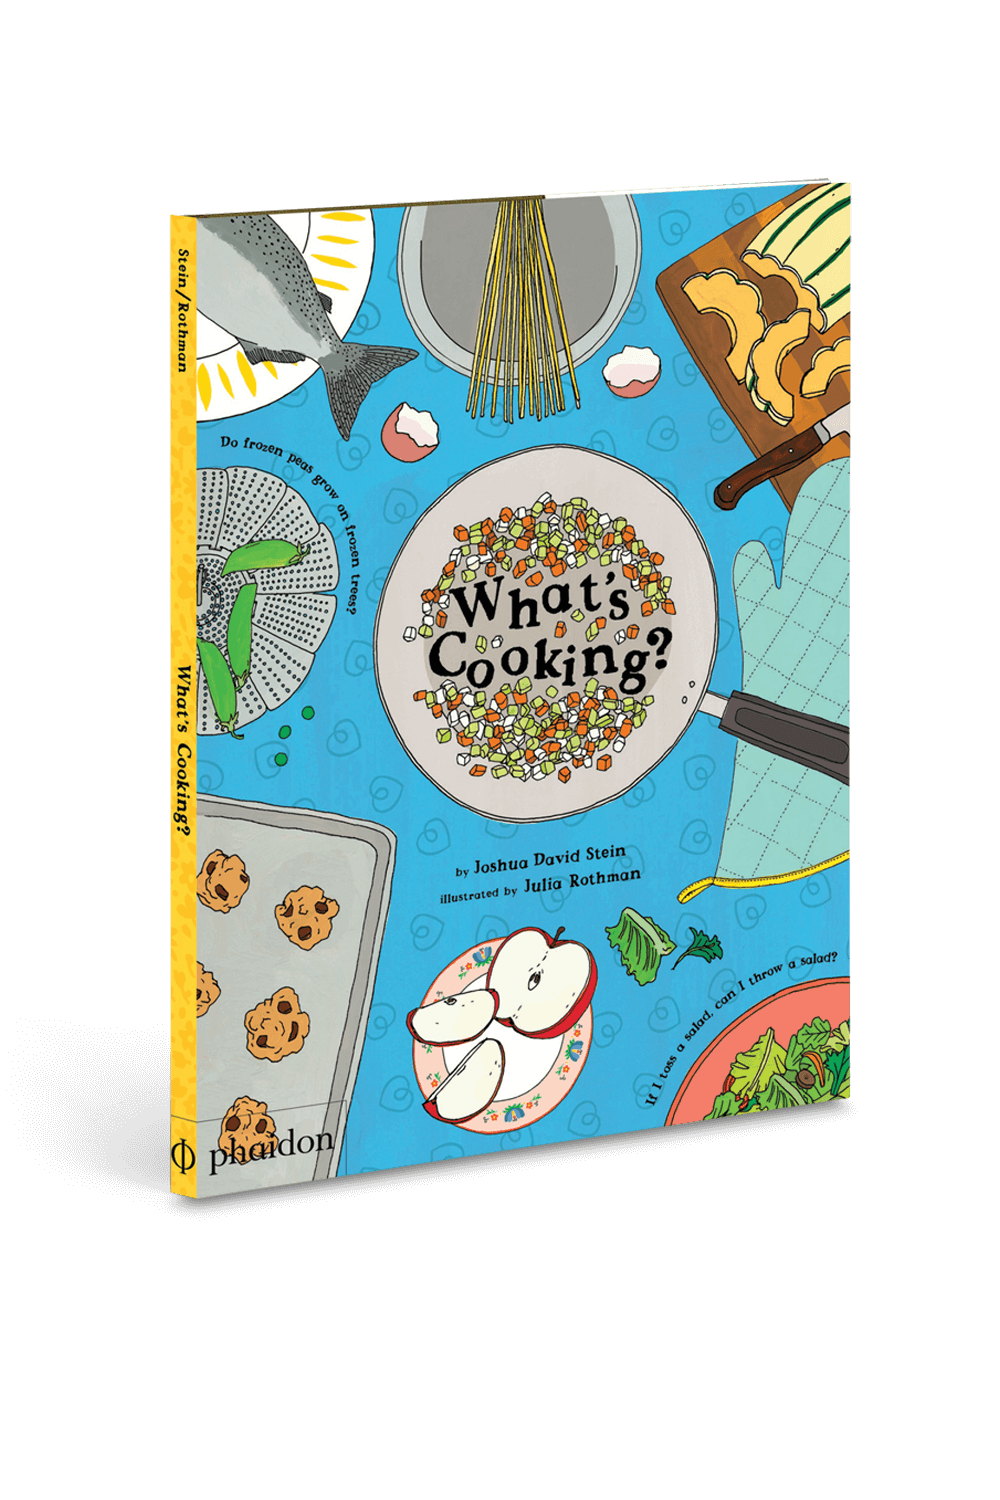 What’s Cooking? PHAIDON